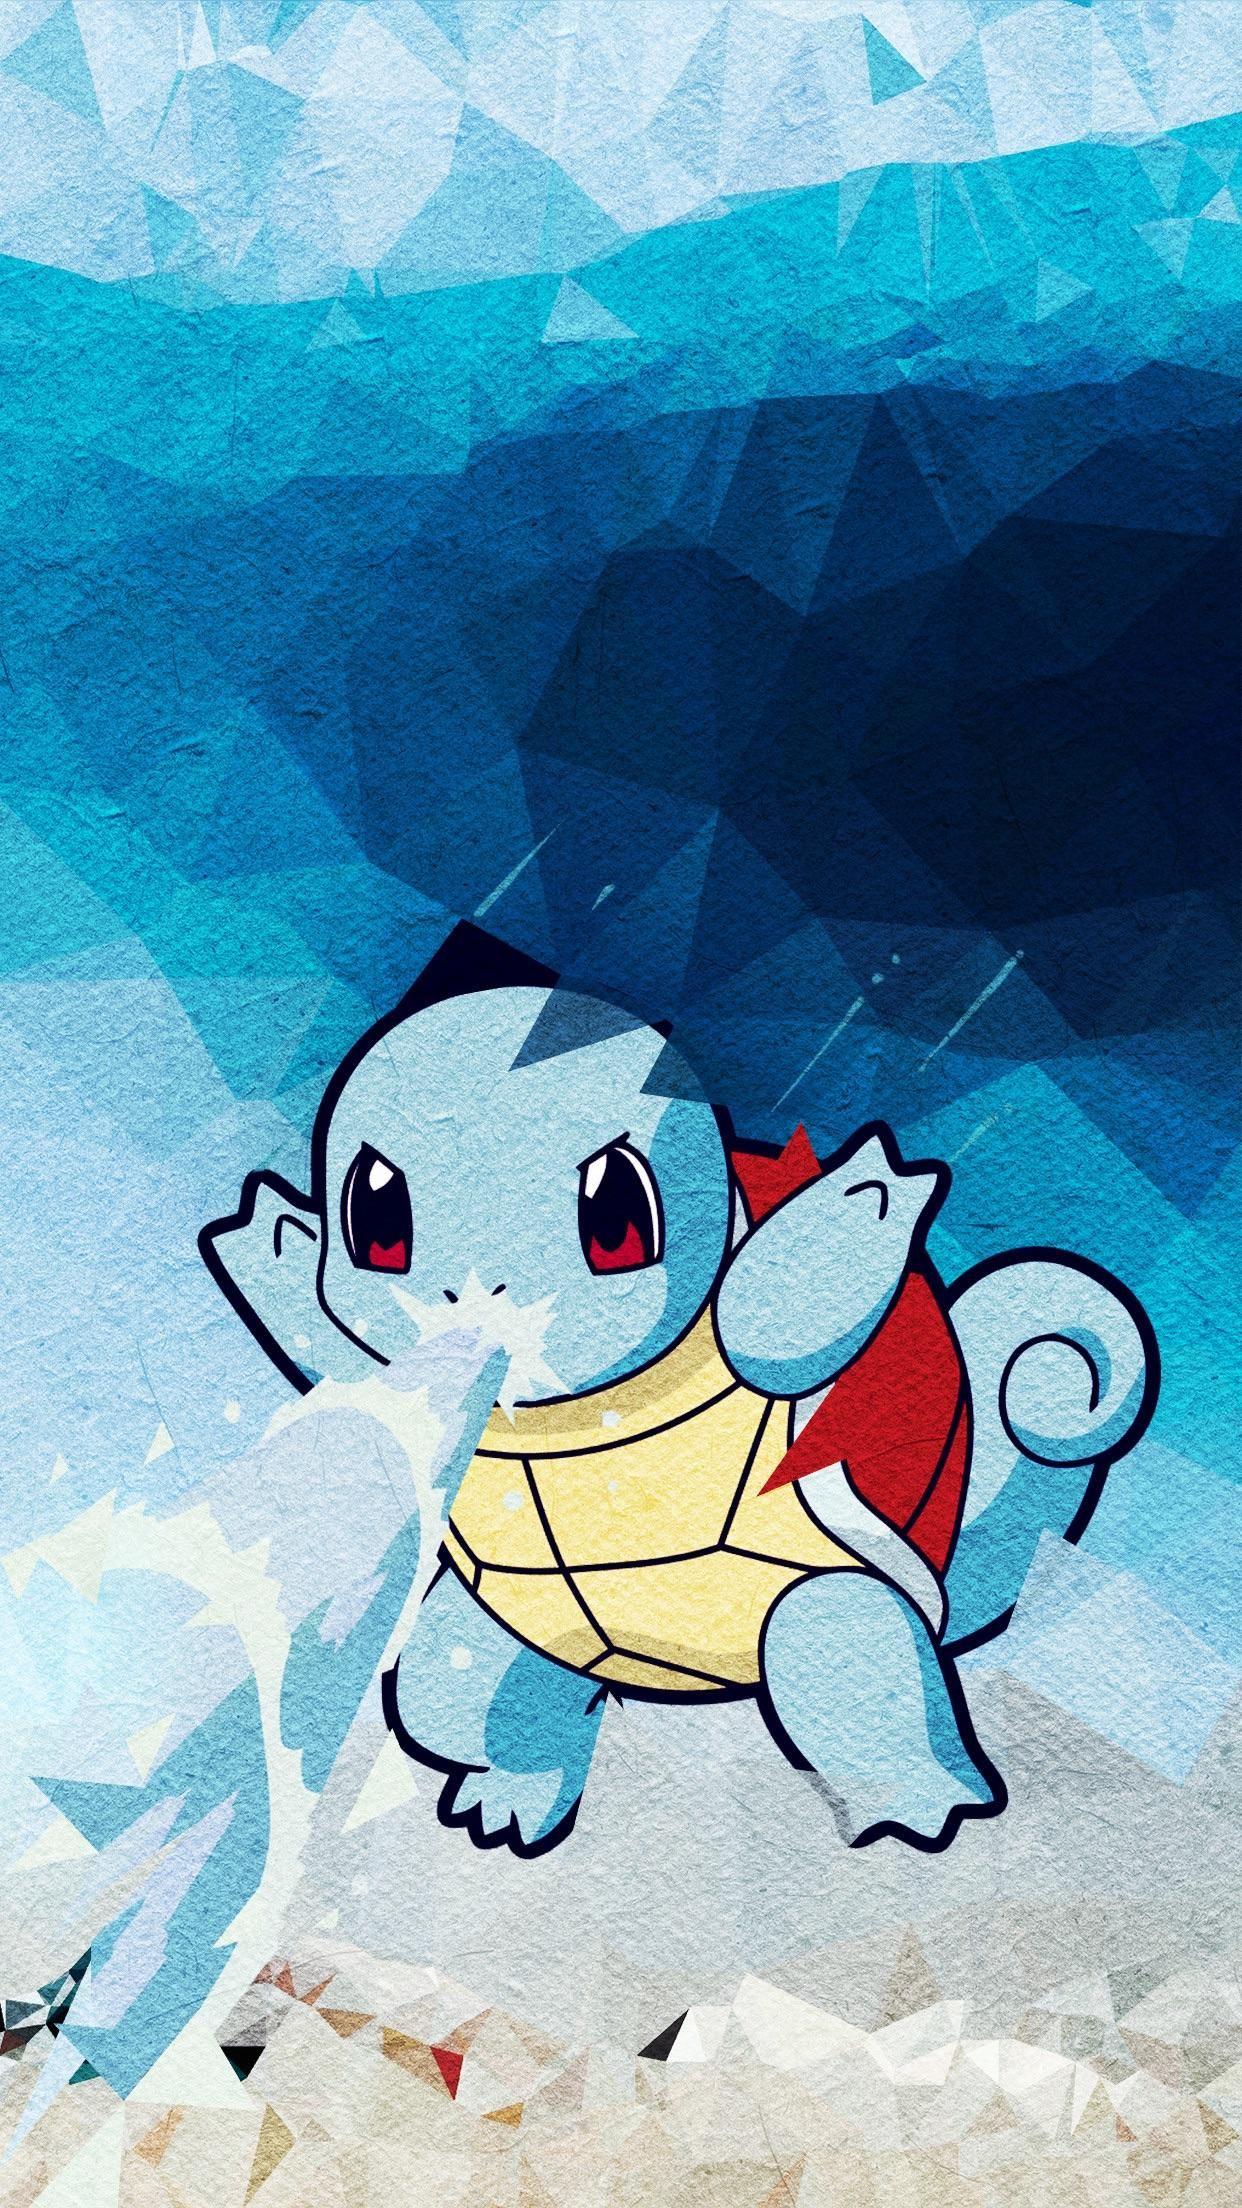 Squirtle Wallpaper. Pokemon, Pokemon background, Squirtle